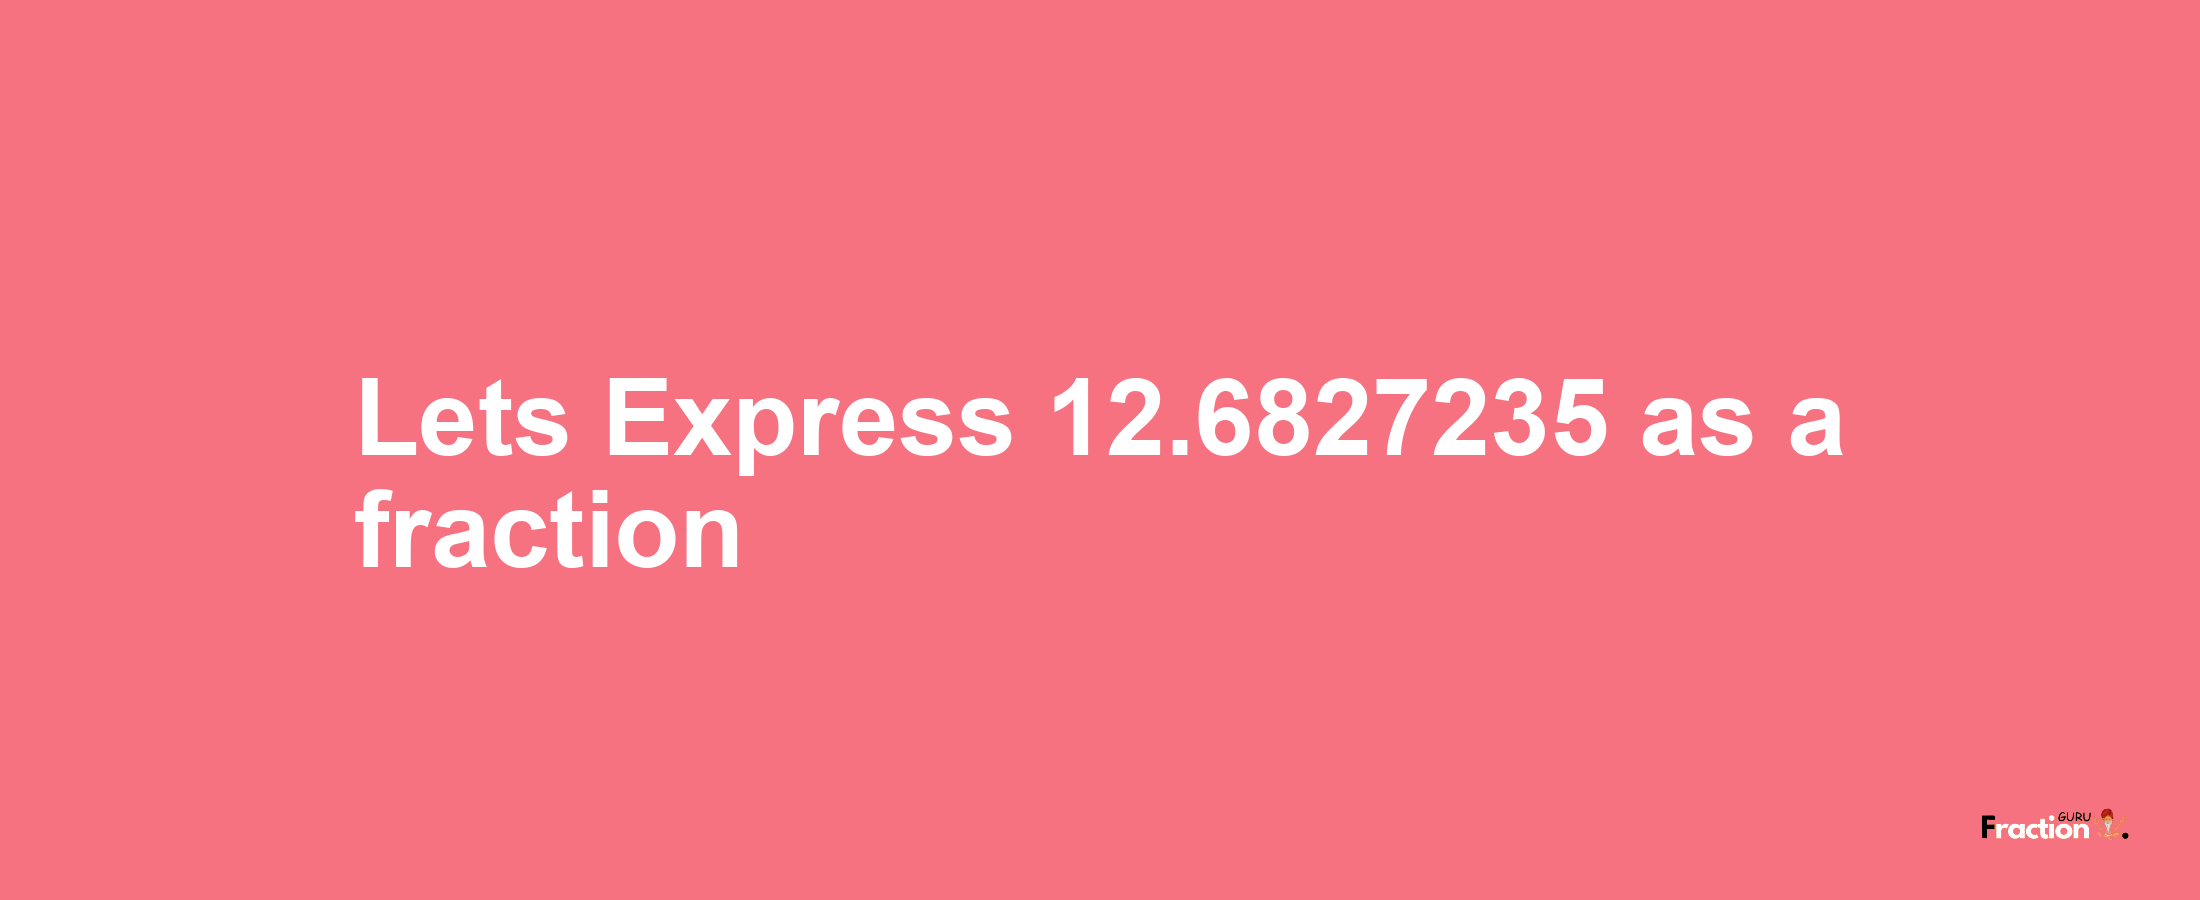 Lets Express 12.6827235 as afraction